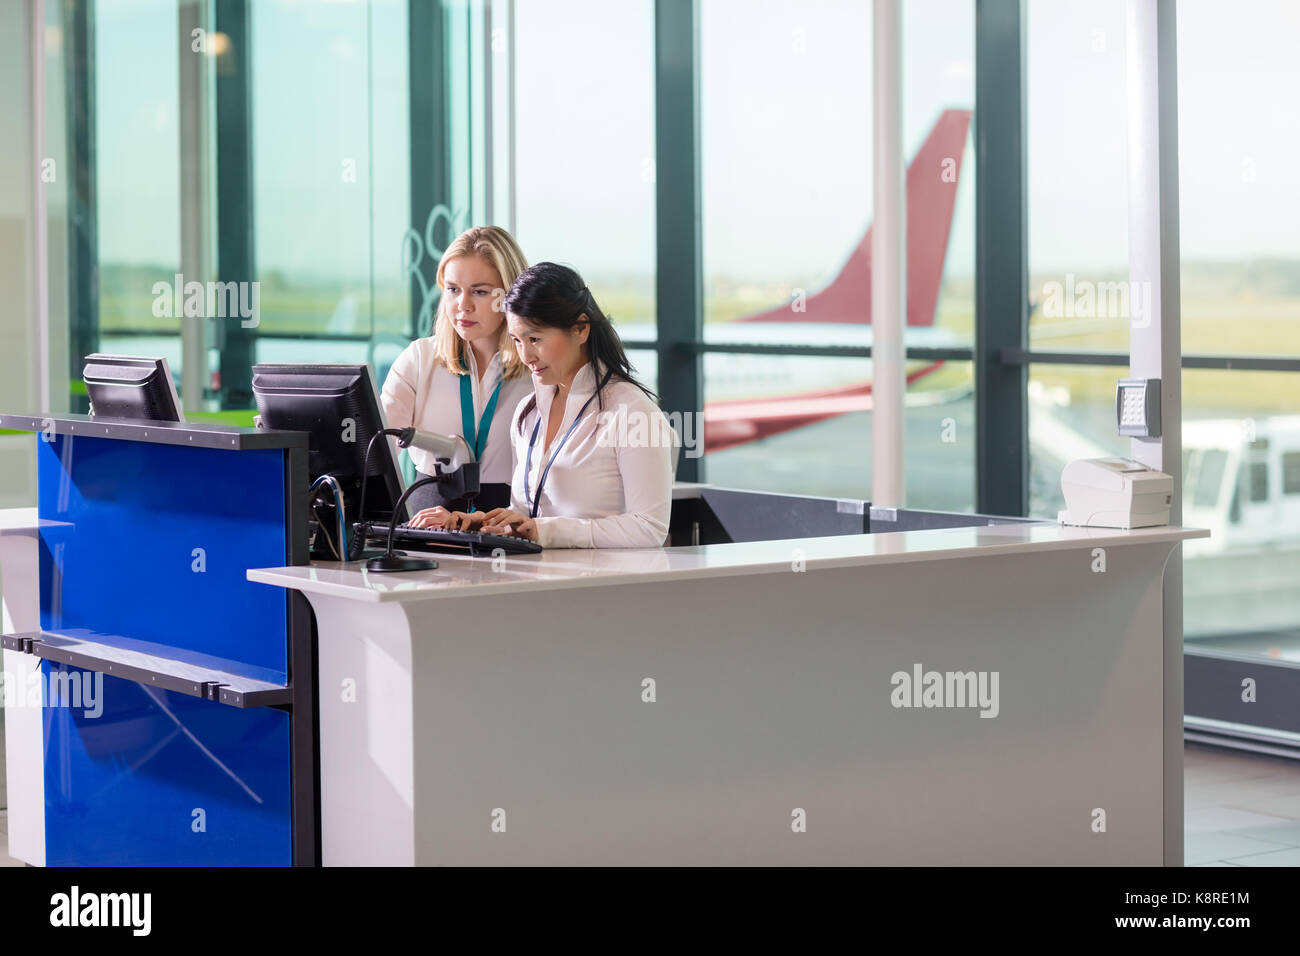 Ground Staff Using Computer At Counter In Airport Stock Photo